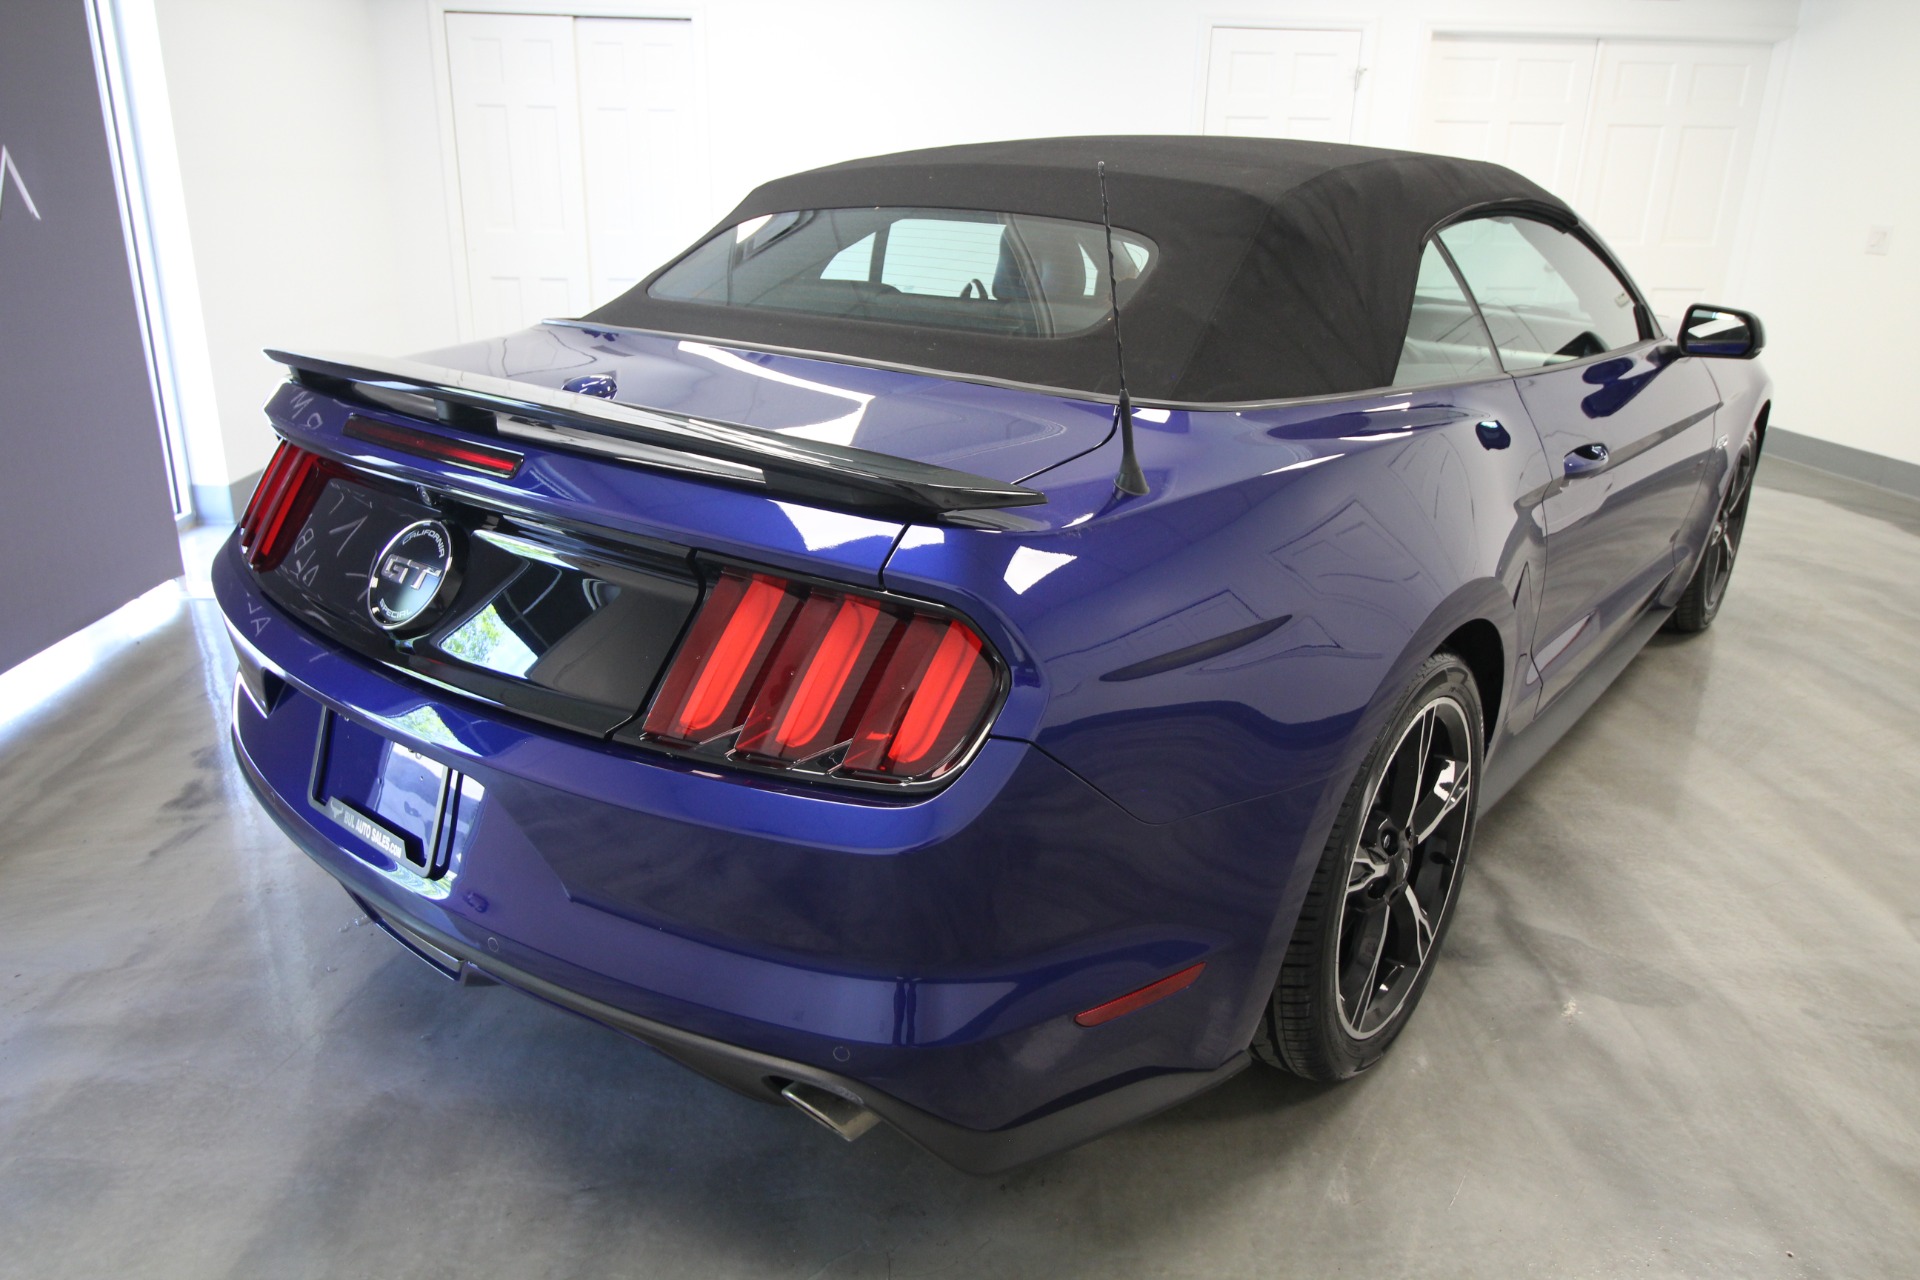 Used 2016 BLUE Ford Mustang GT CONVERTIBLE CALIFORNIA EDITION | Albany, NY